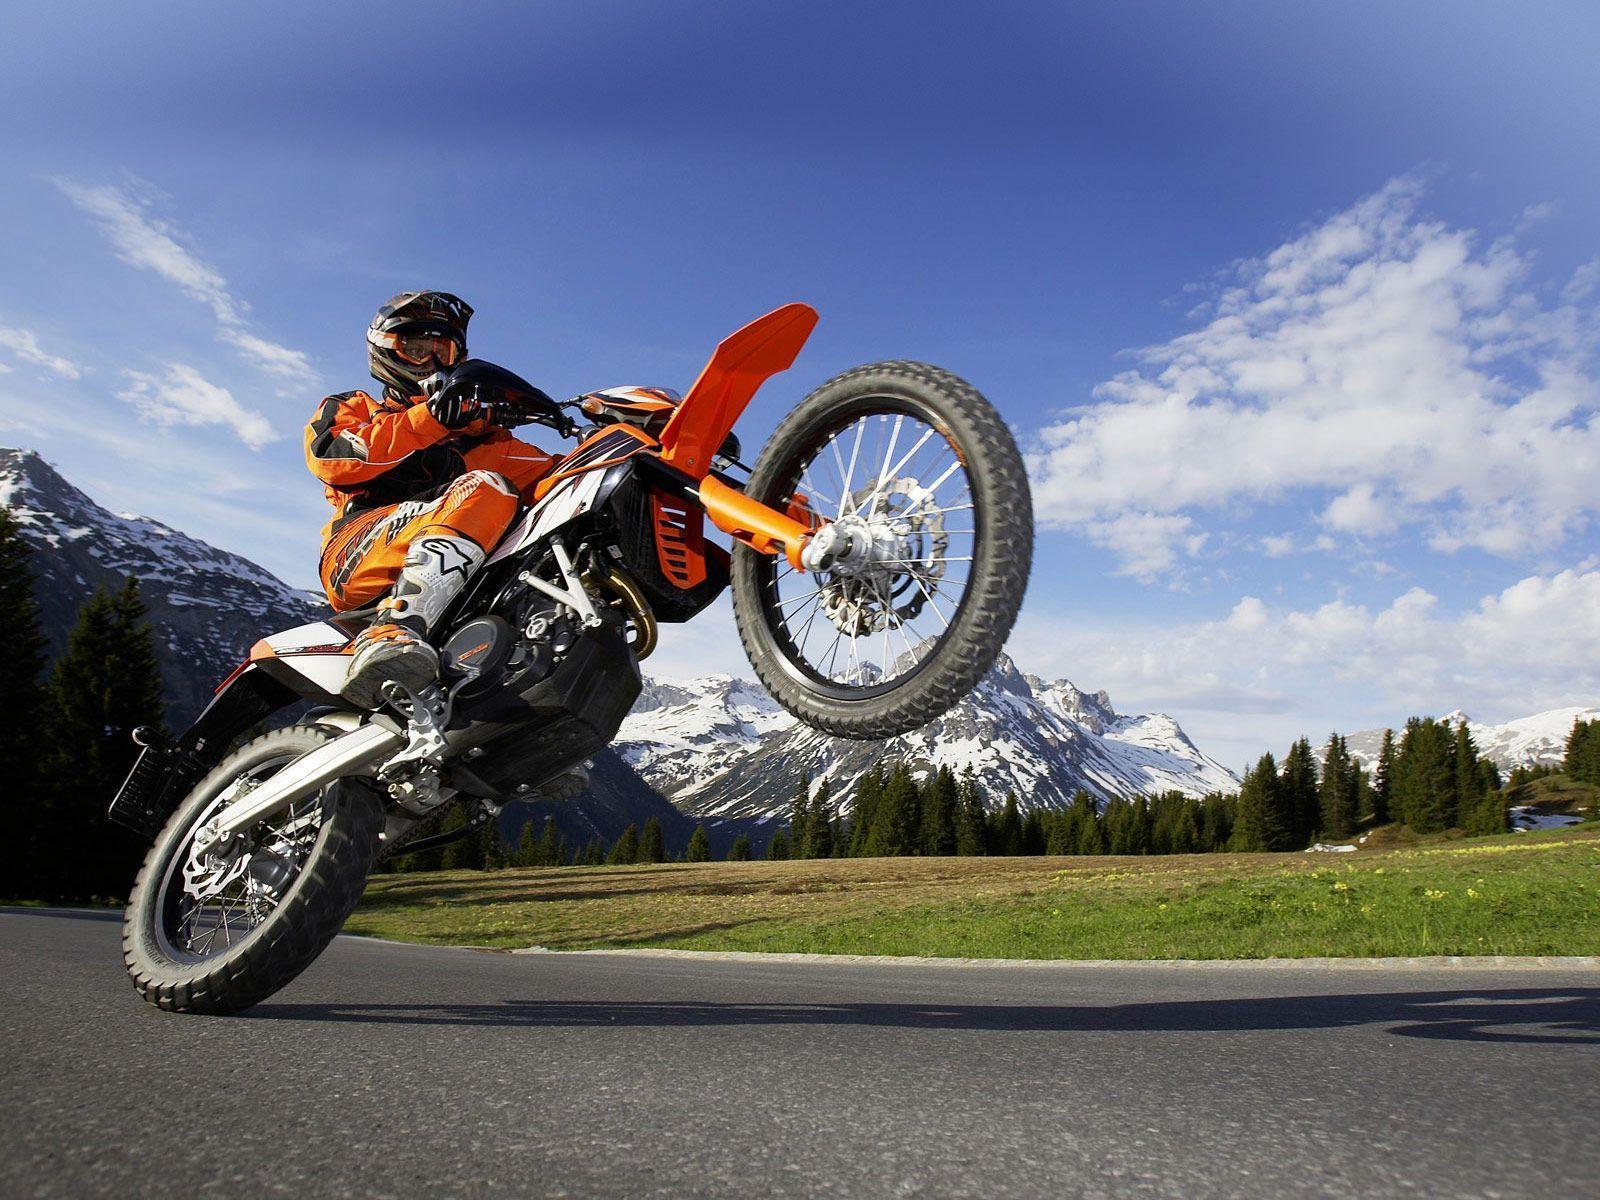 KTM Supermoto Action Wallpaper For Android Wallpaper. High